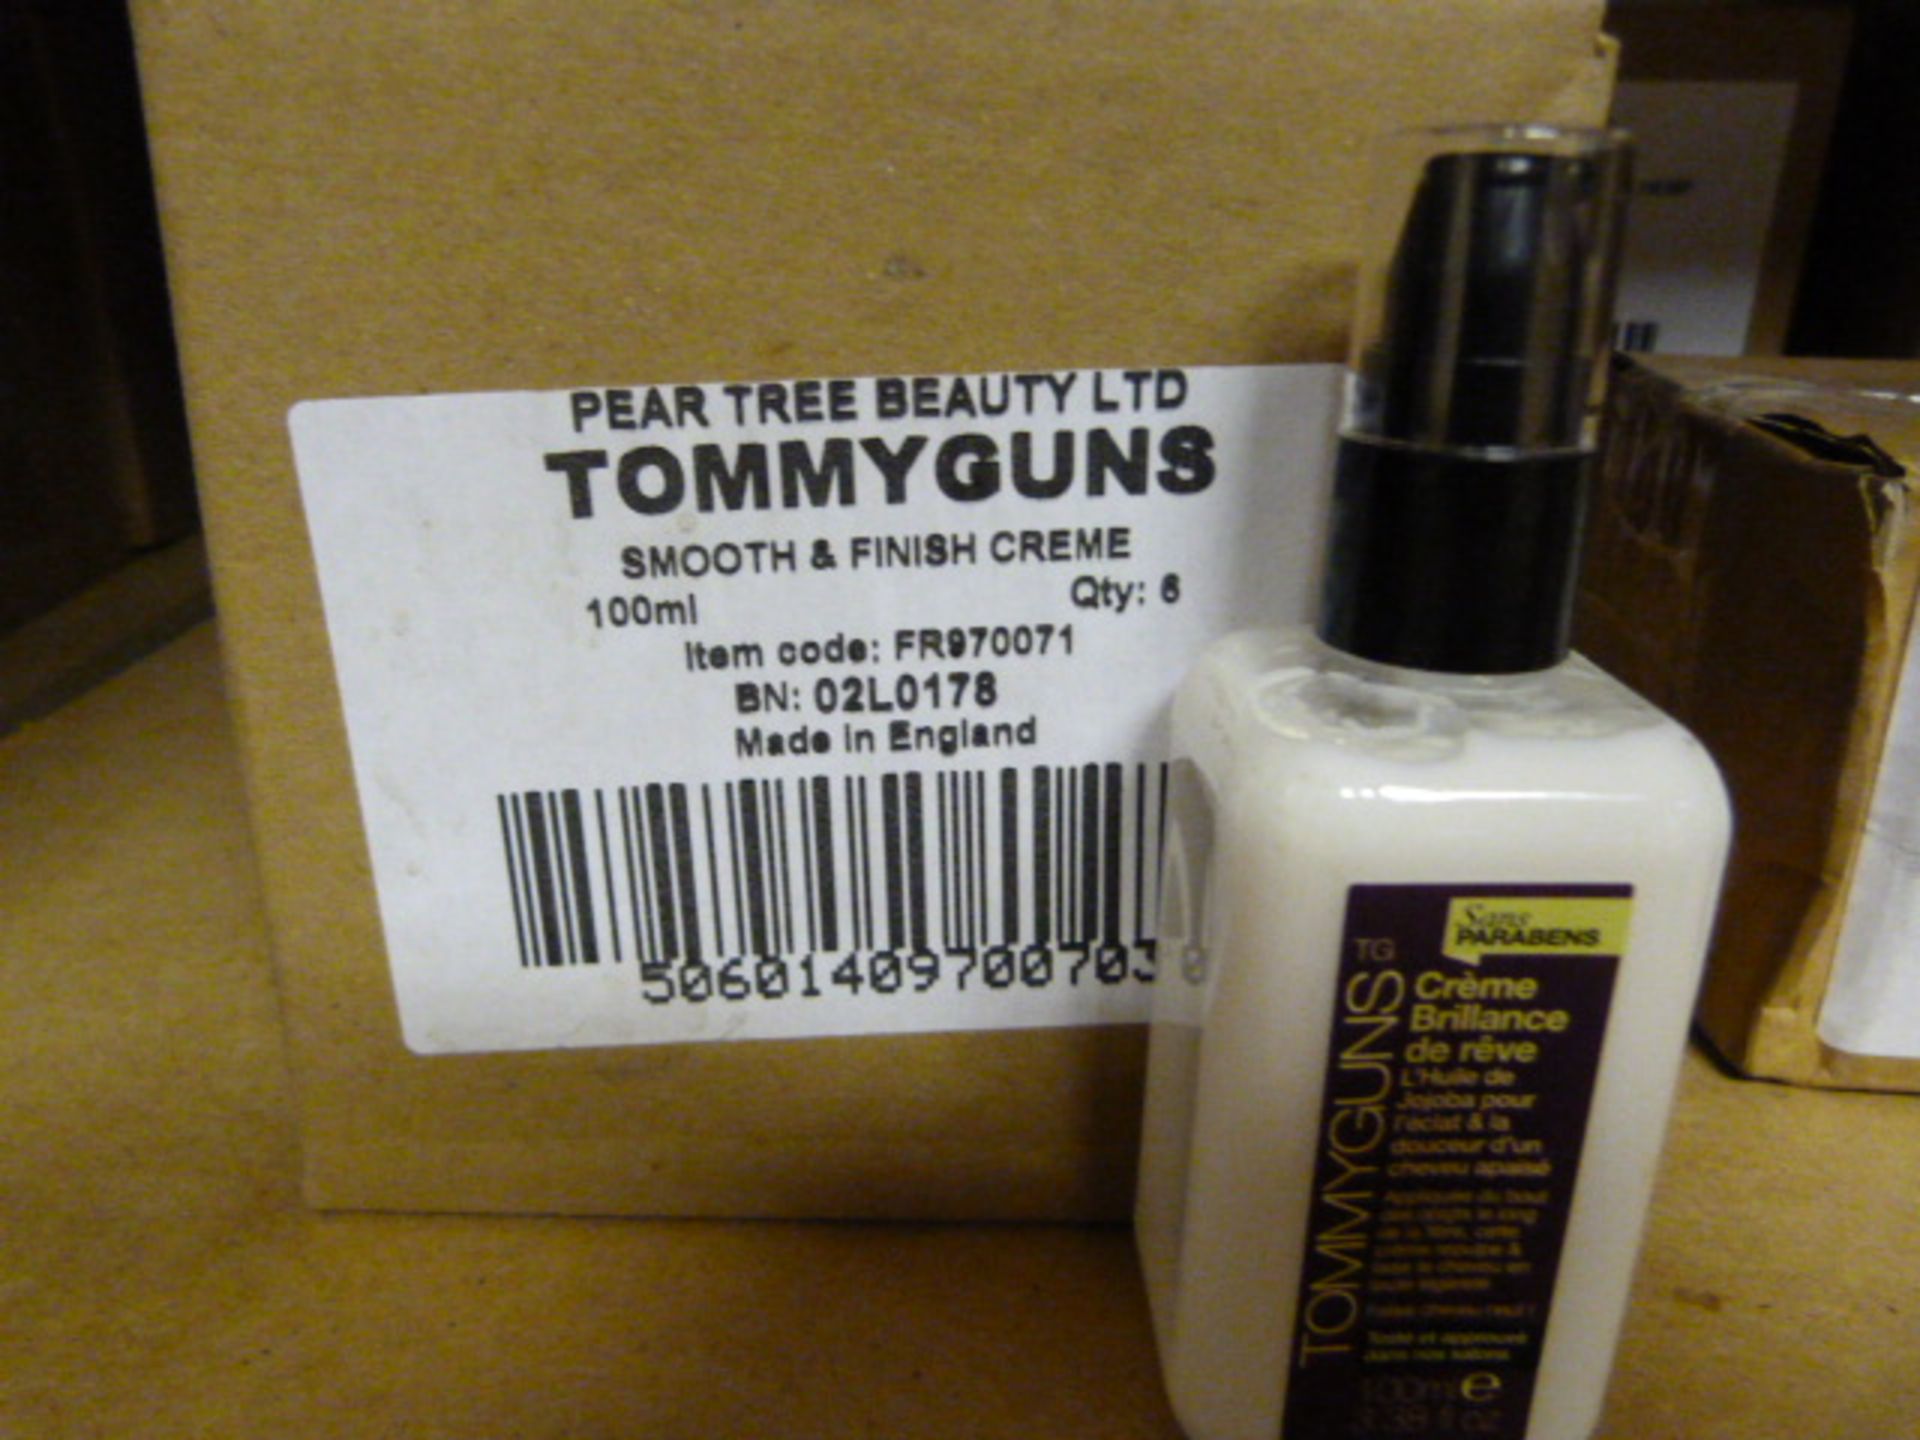 *Six 100ml Bottles of Tommyguns Smooth and Finish Cream